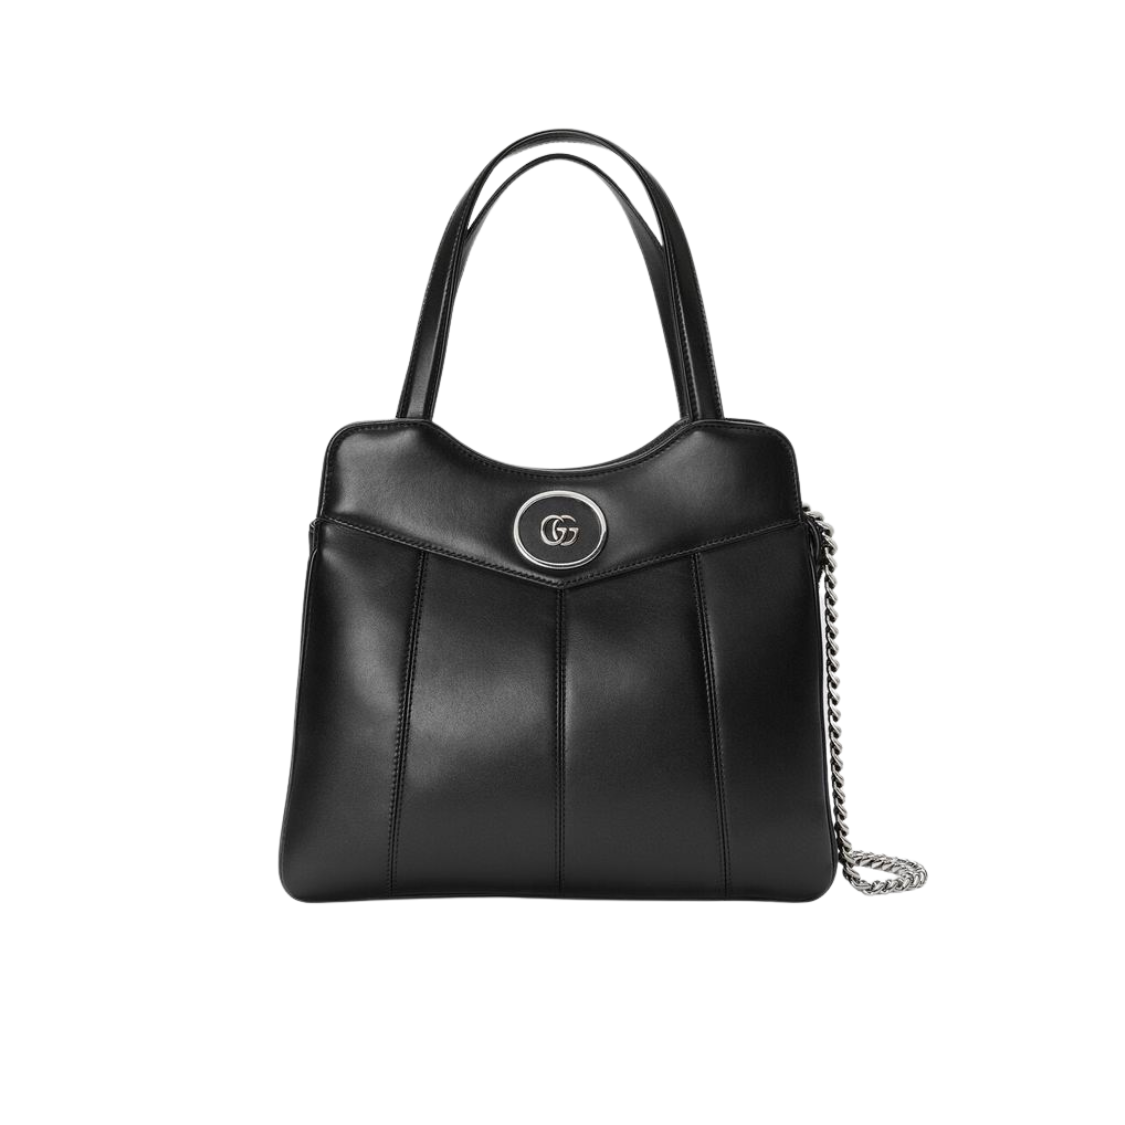 Petite Small Black Leather Tote Bag - Compact Elegance